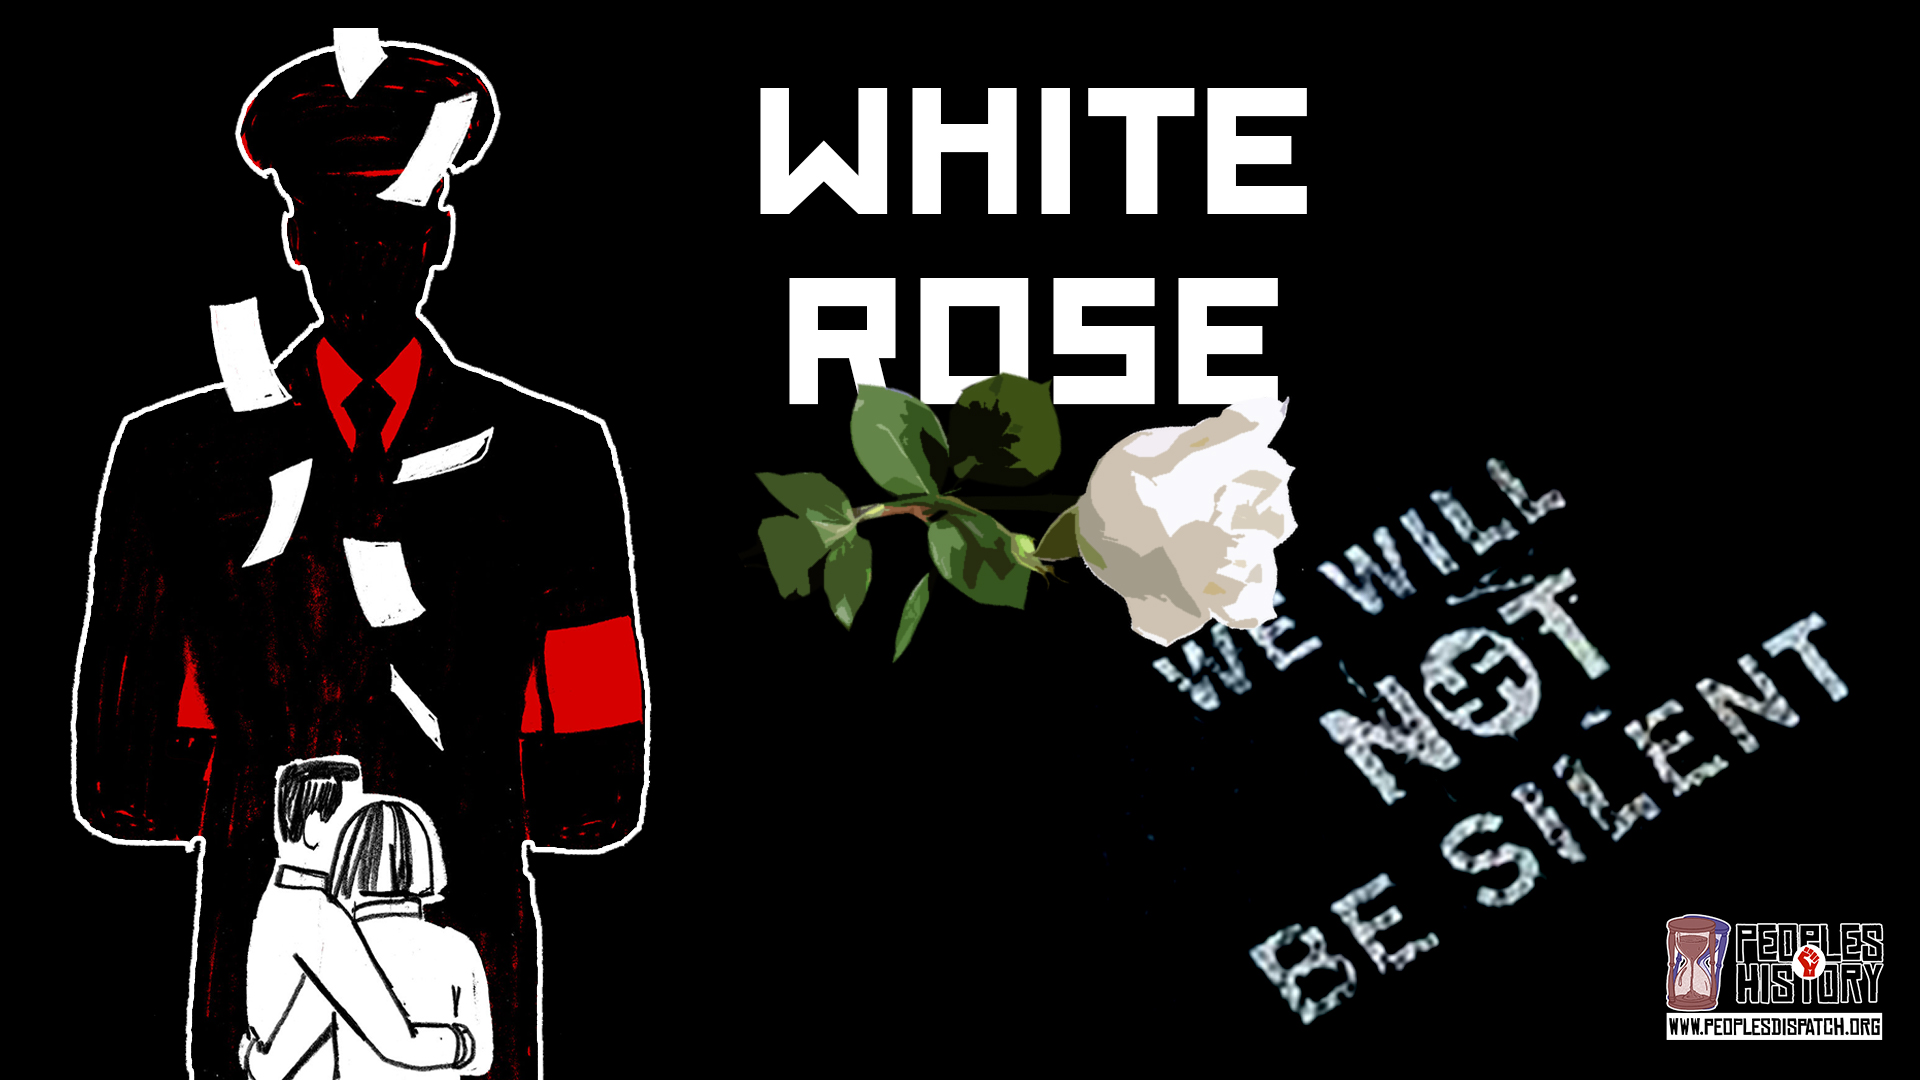 NAZI GERMANY_Arrest of white roses group members_Sophie and Hans Scholl_